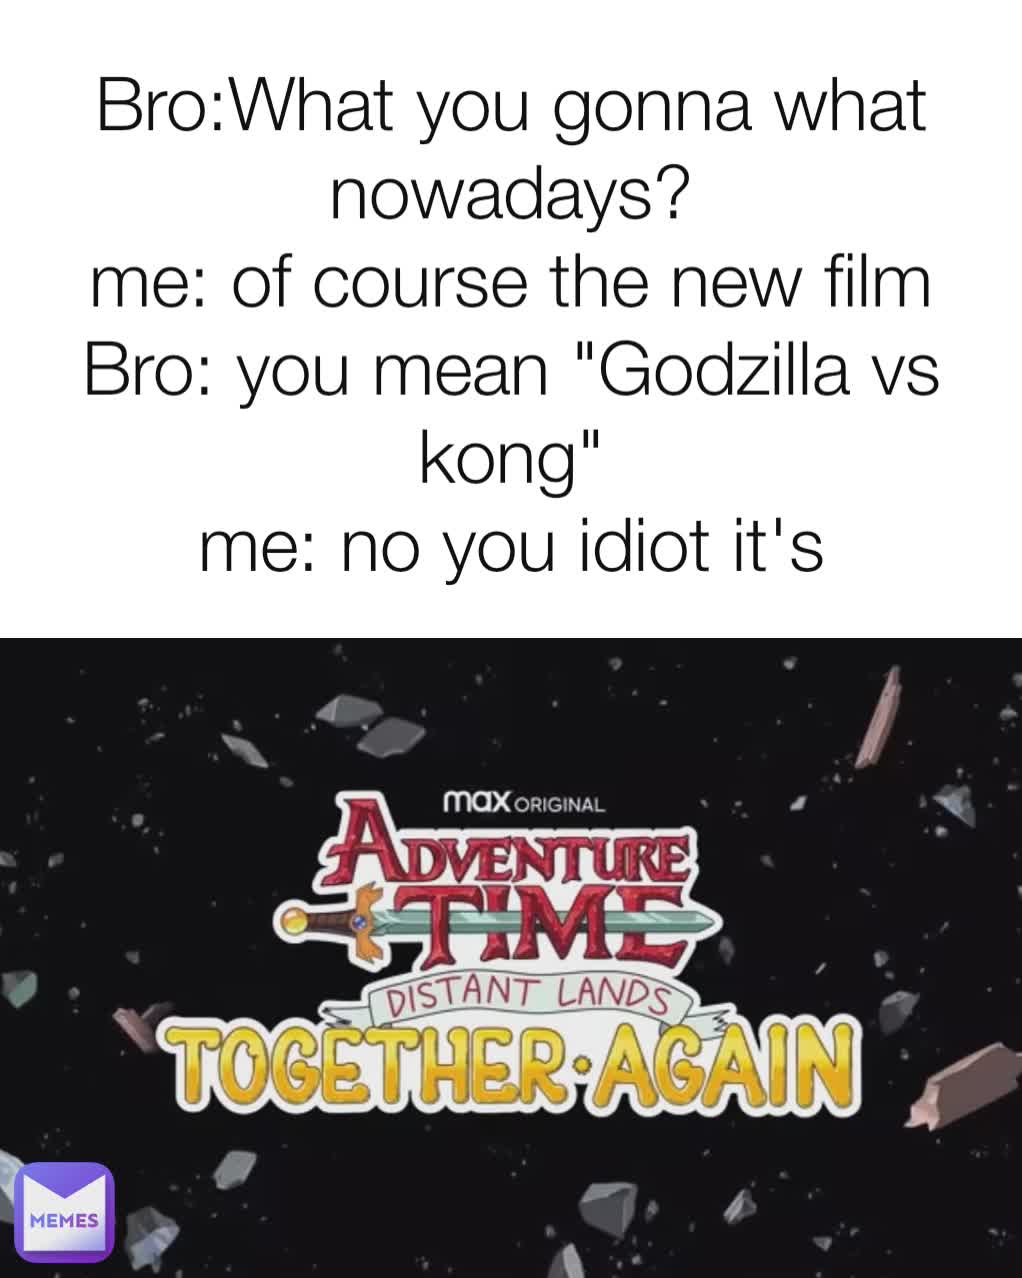 Bro:What you gonna what nowadays?
me: of course the new film
Bro: you mean "Godzilla vs kong"
me: no you idiot it's